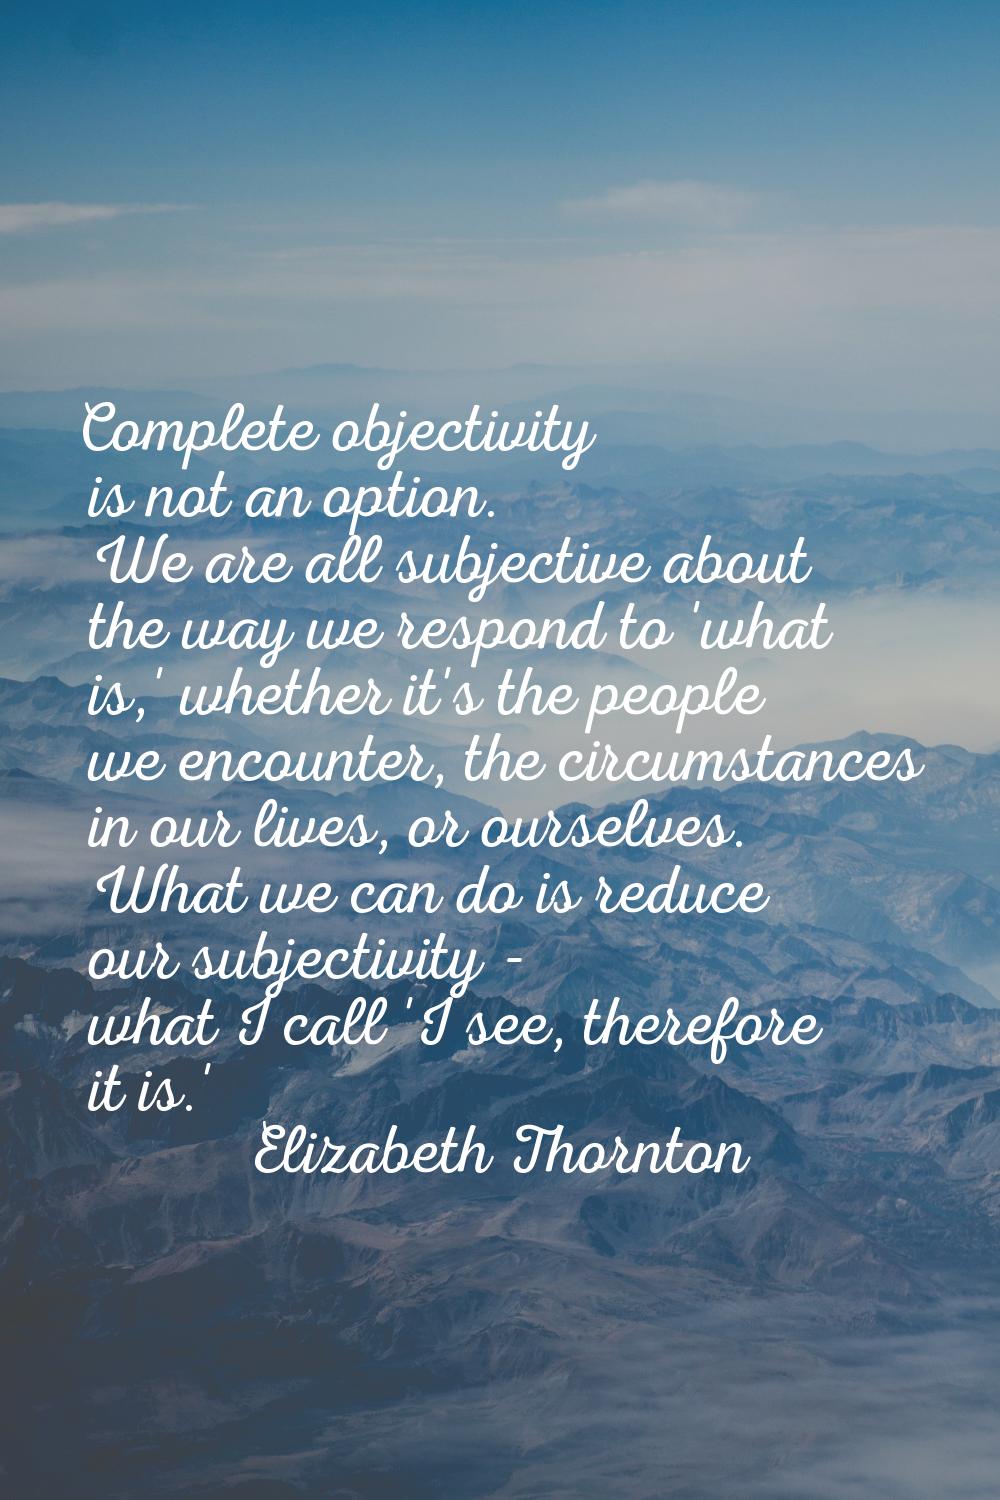 Complete objectivity is not an option. We are all subjective about the way we respond to 'what is,'